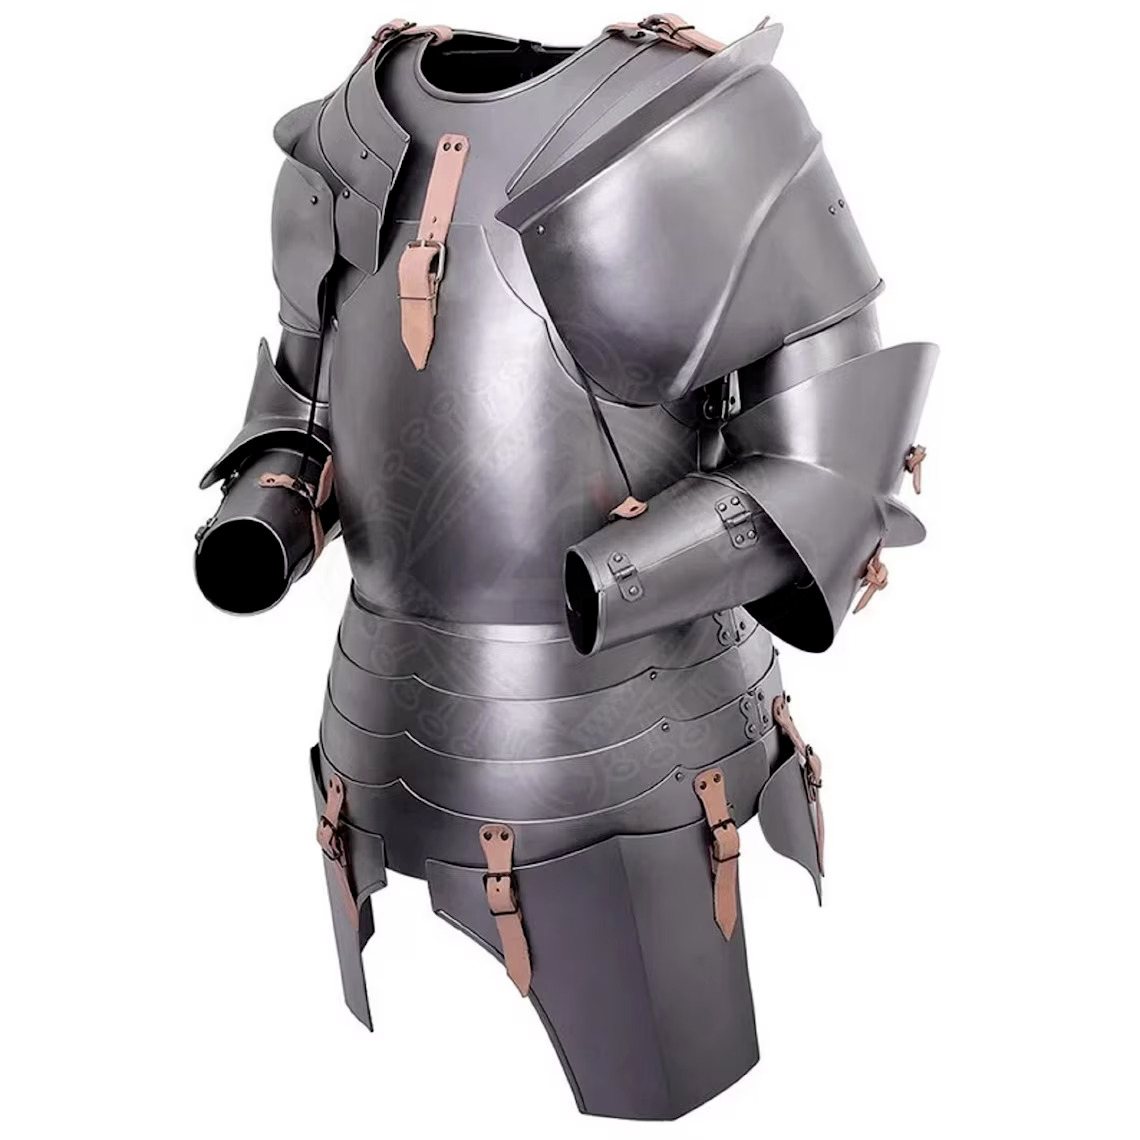 Medieval Armor Suit Steel Full Body Plated Armor Suit Undead Knight X-MASS Gift